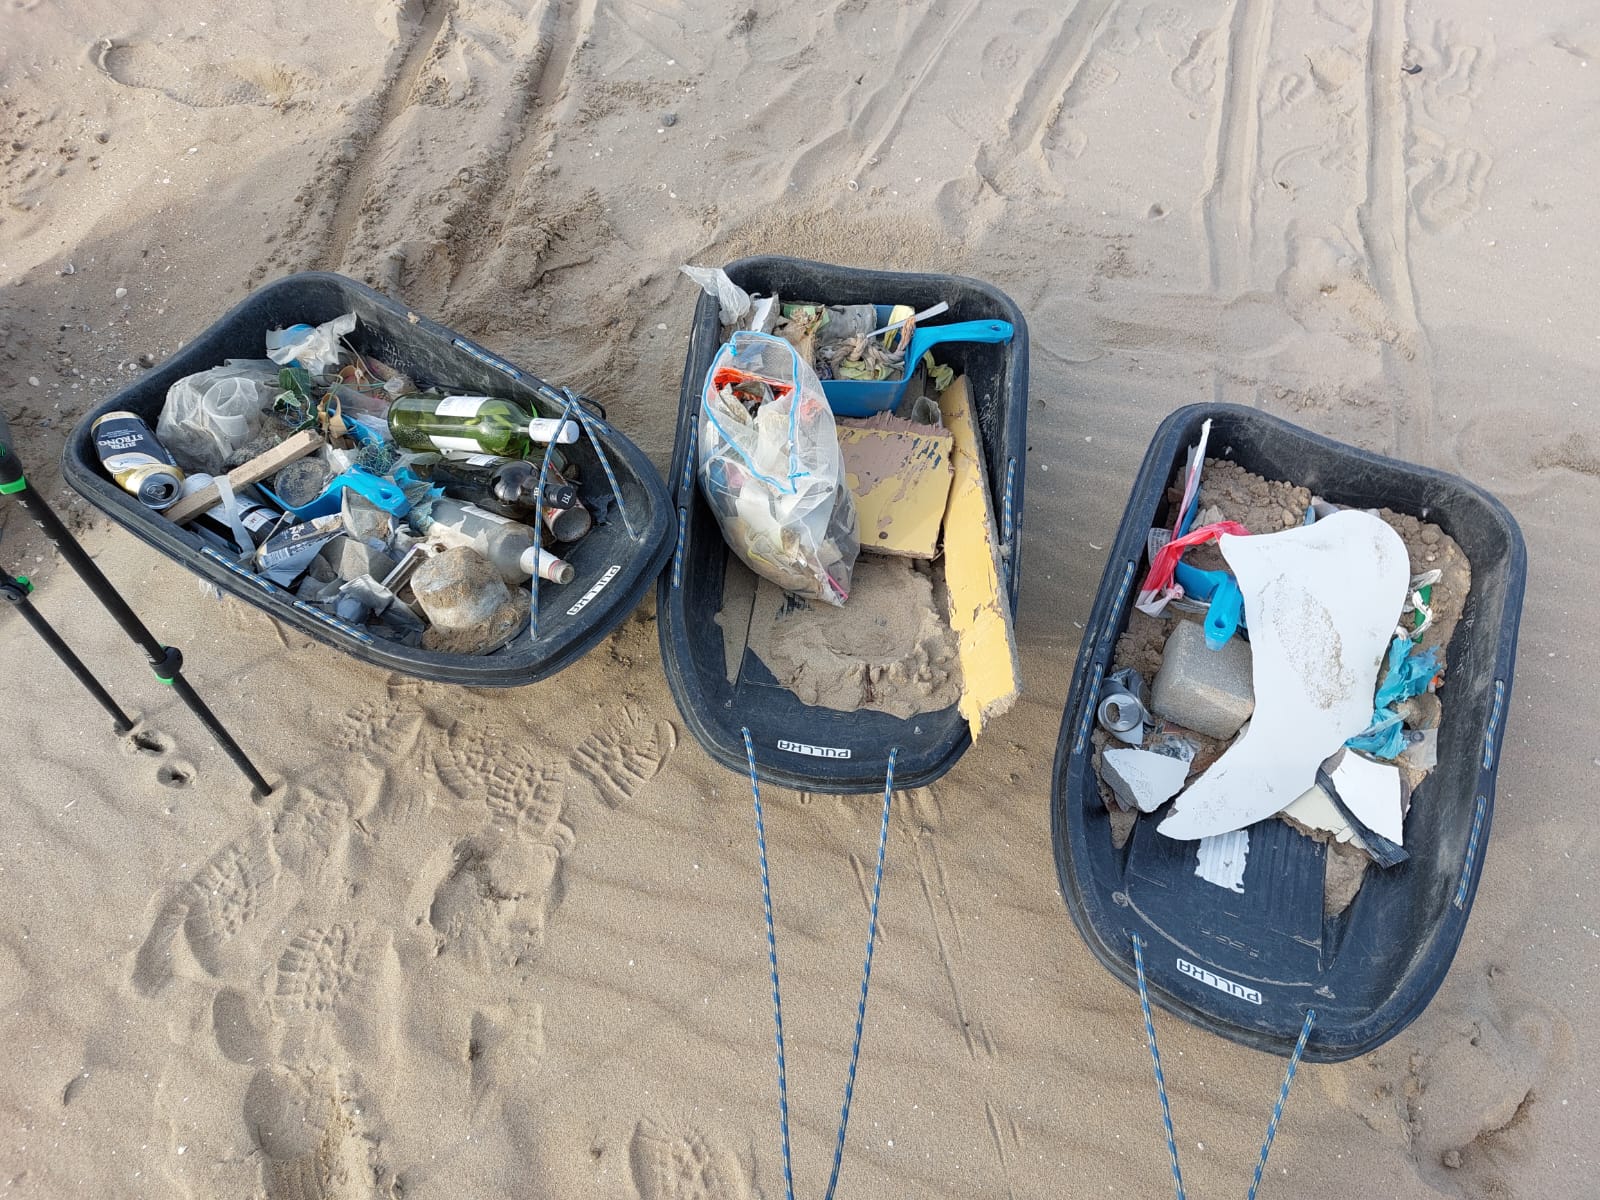 Get fit while beach cleaning with Pullka Outdoor Training